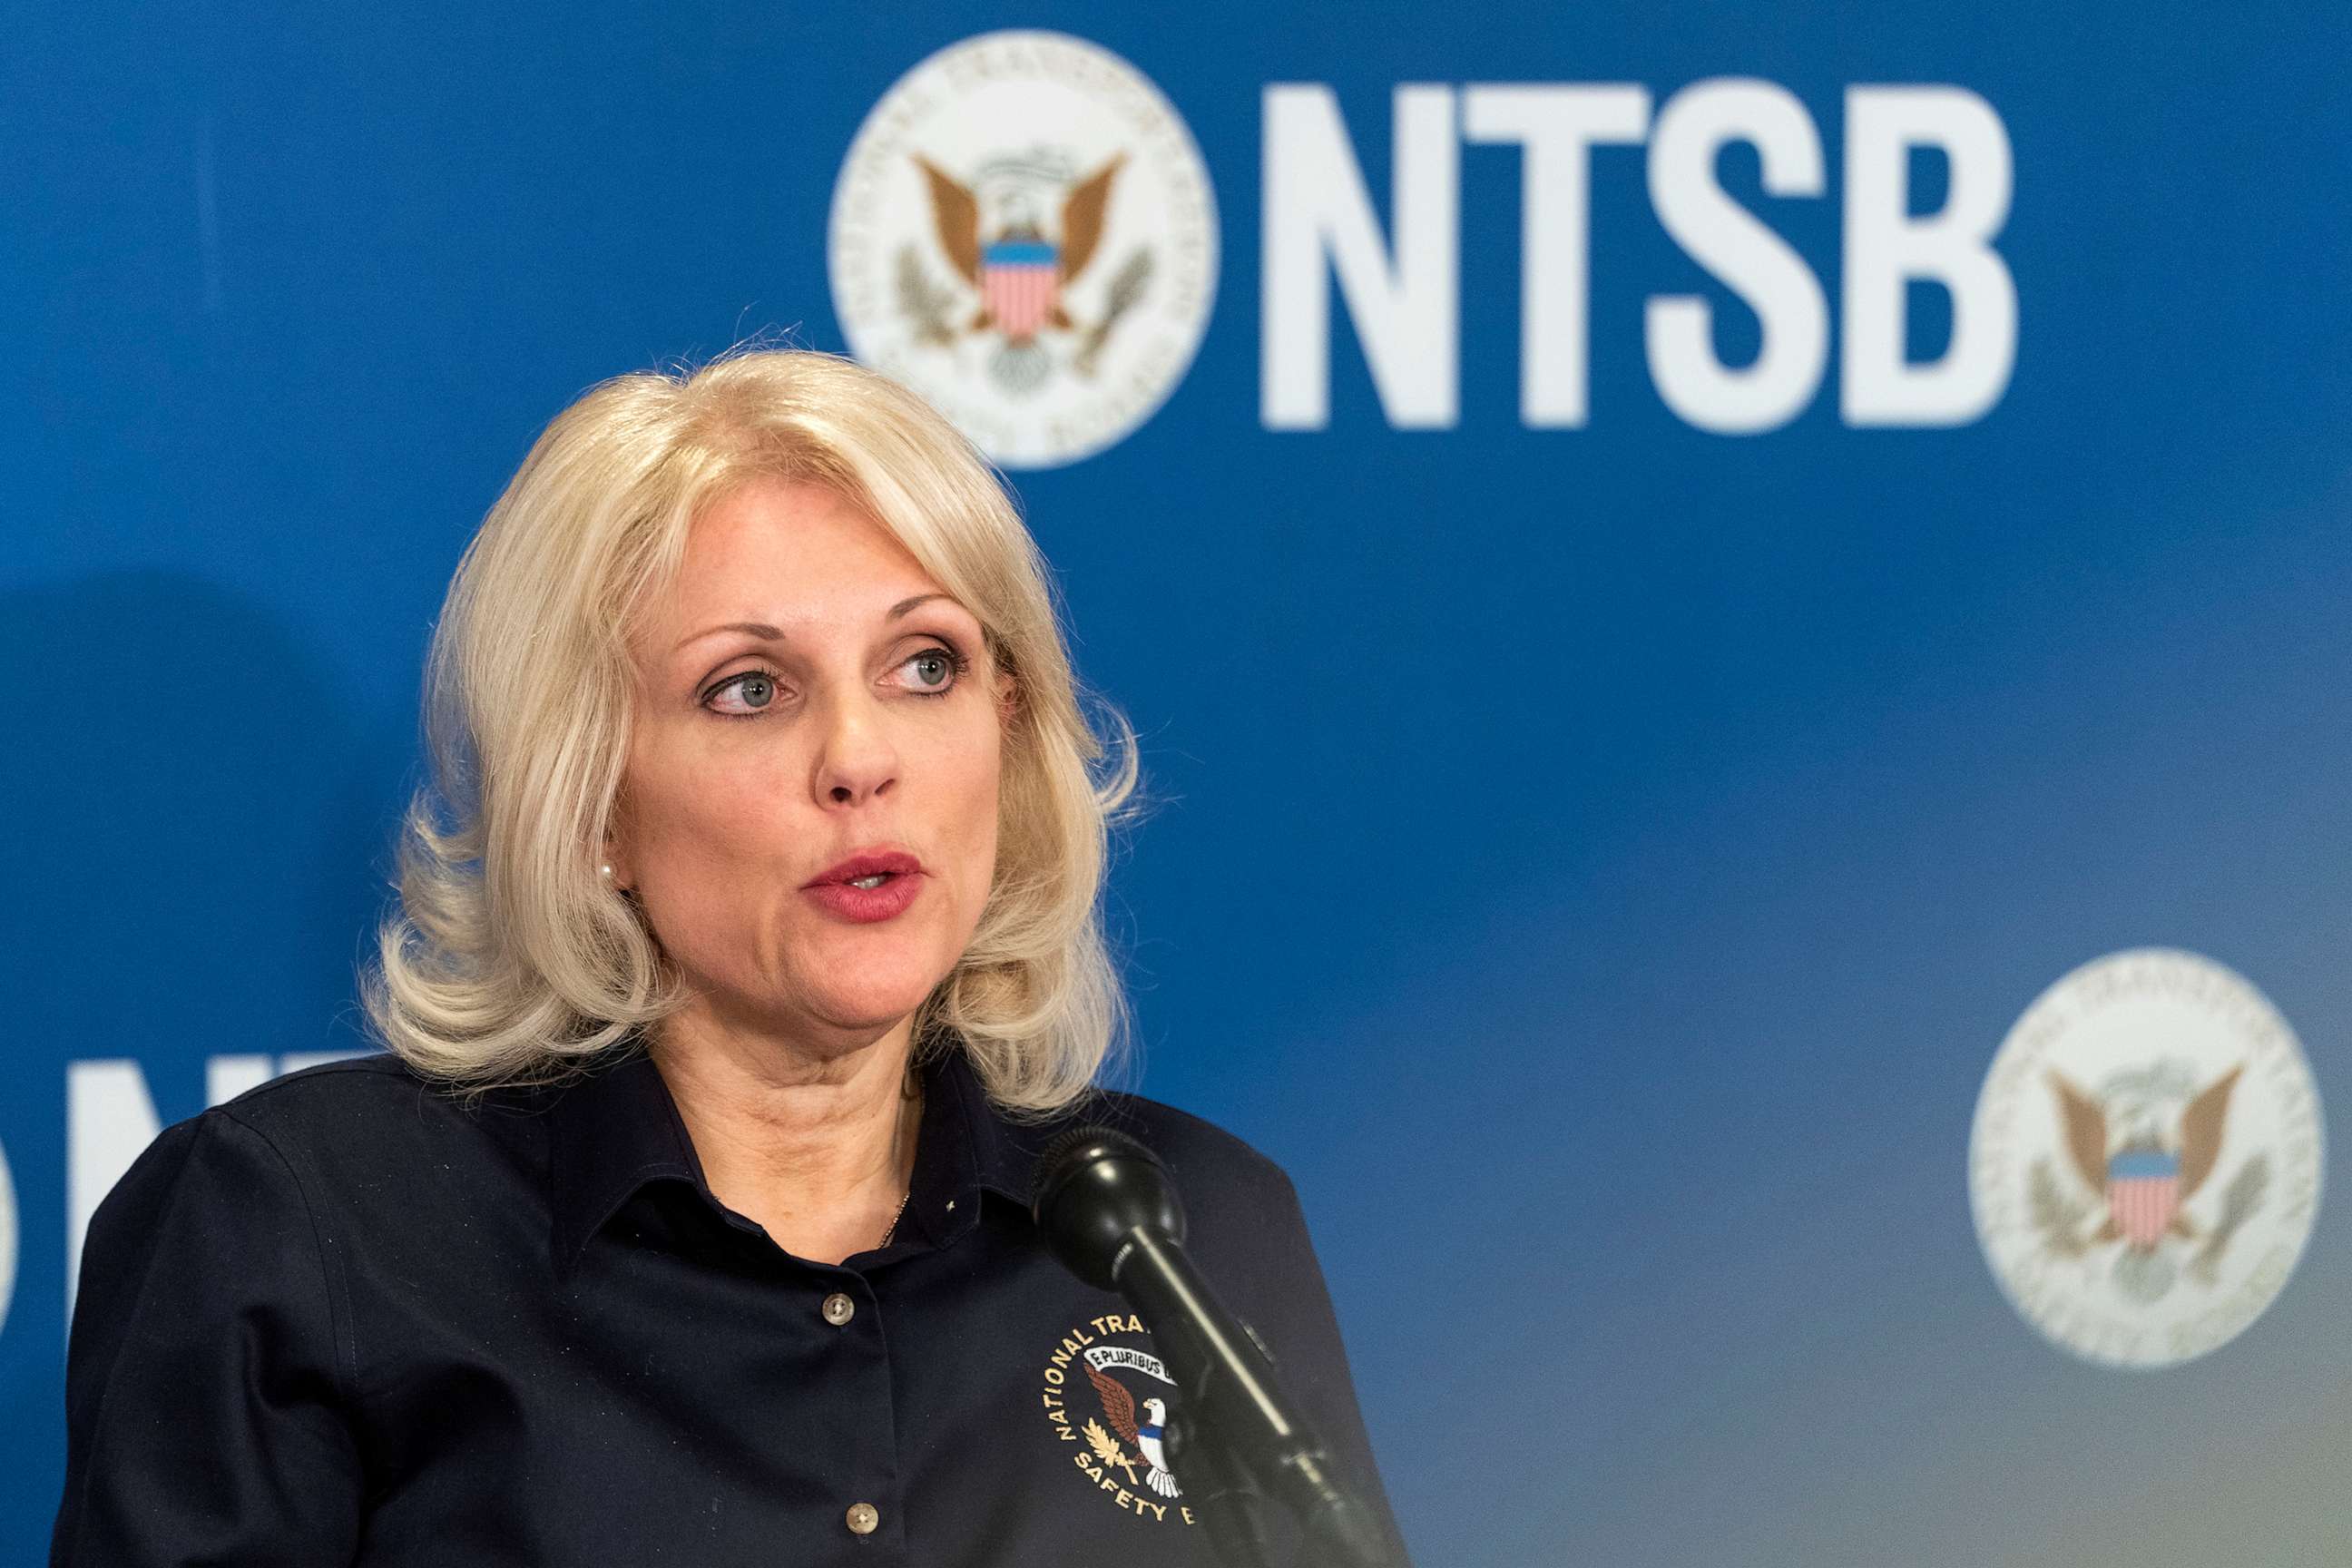 PHOTO: National Transportation Safety Board (NTSB) Chair Jennifer Homendy speaks, Feb. 23, 2023, in Washington, D.C., about the investigation into the Feb. 3 train derailment in East Palestine, Ohio.